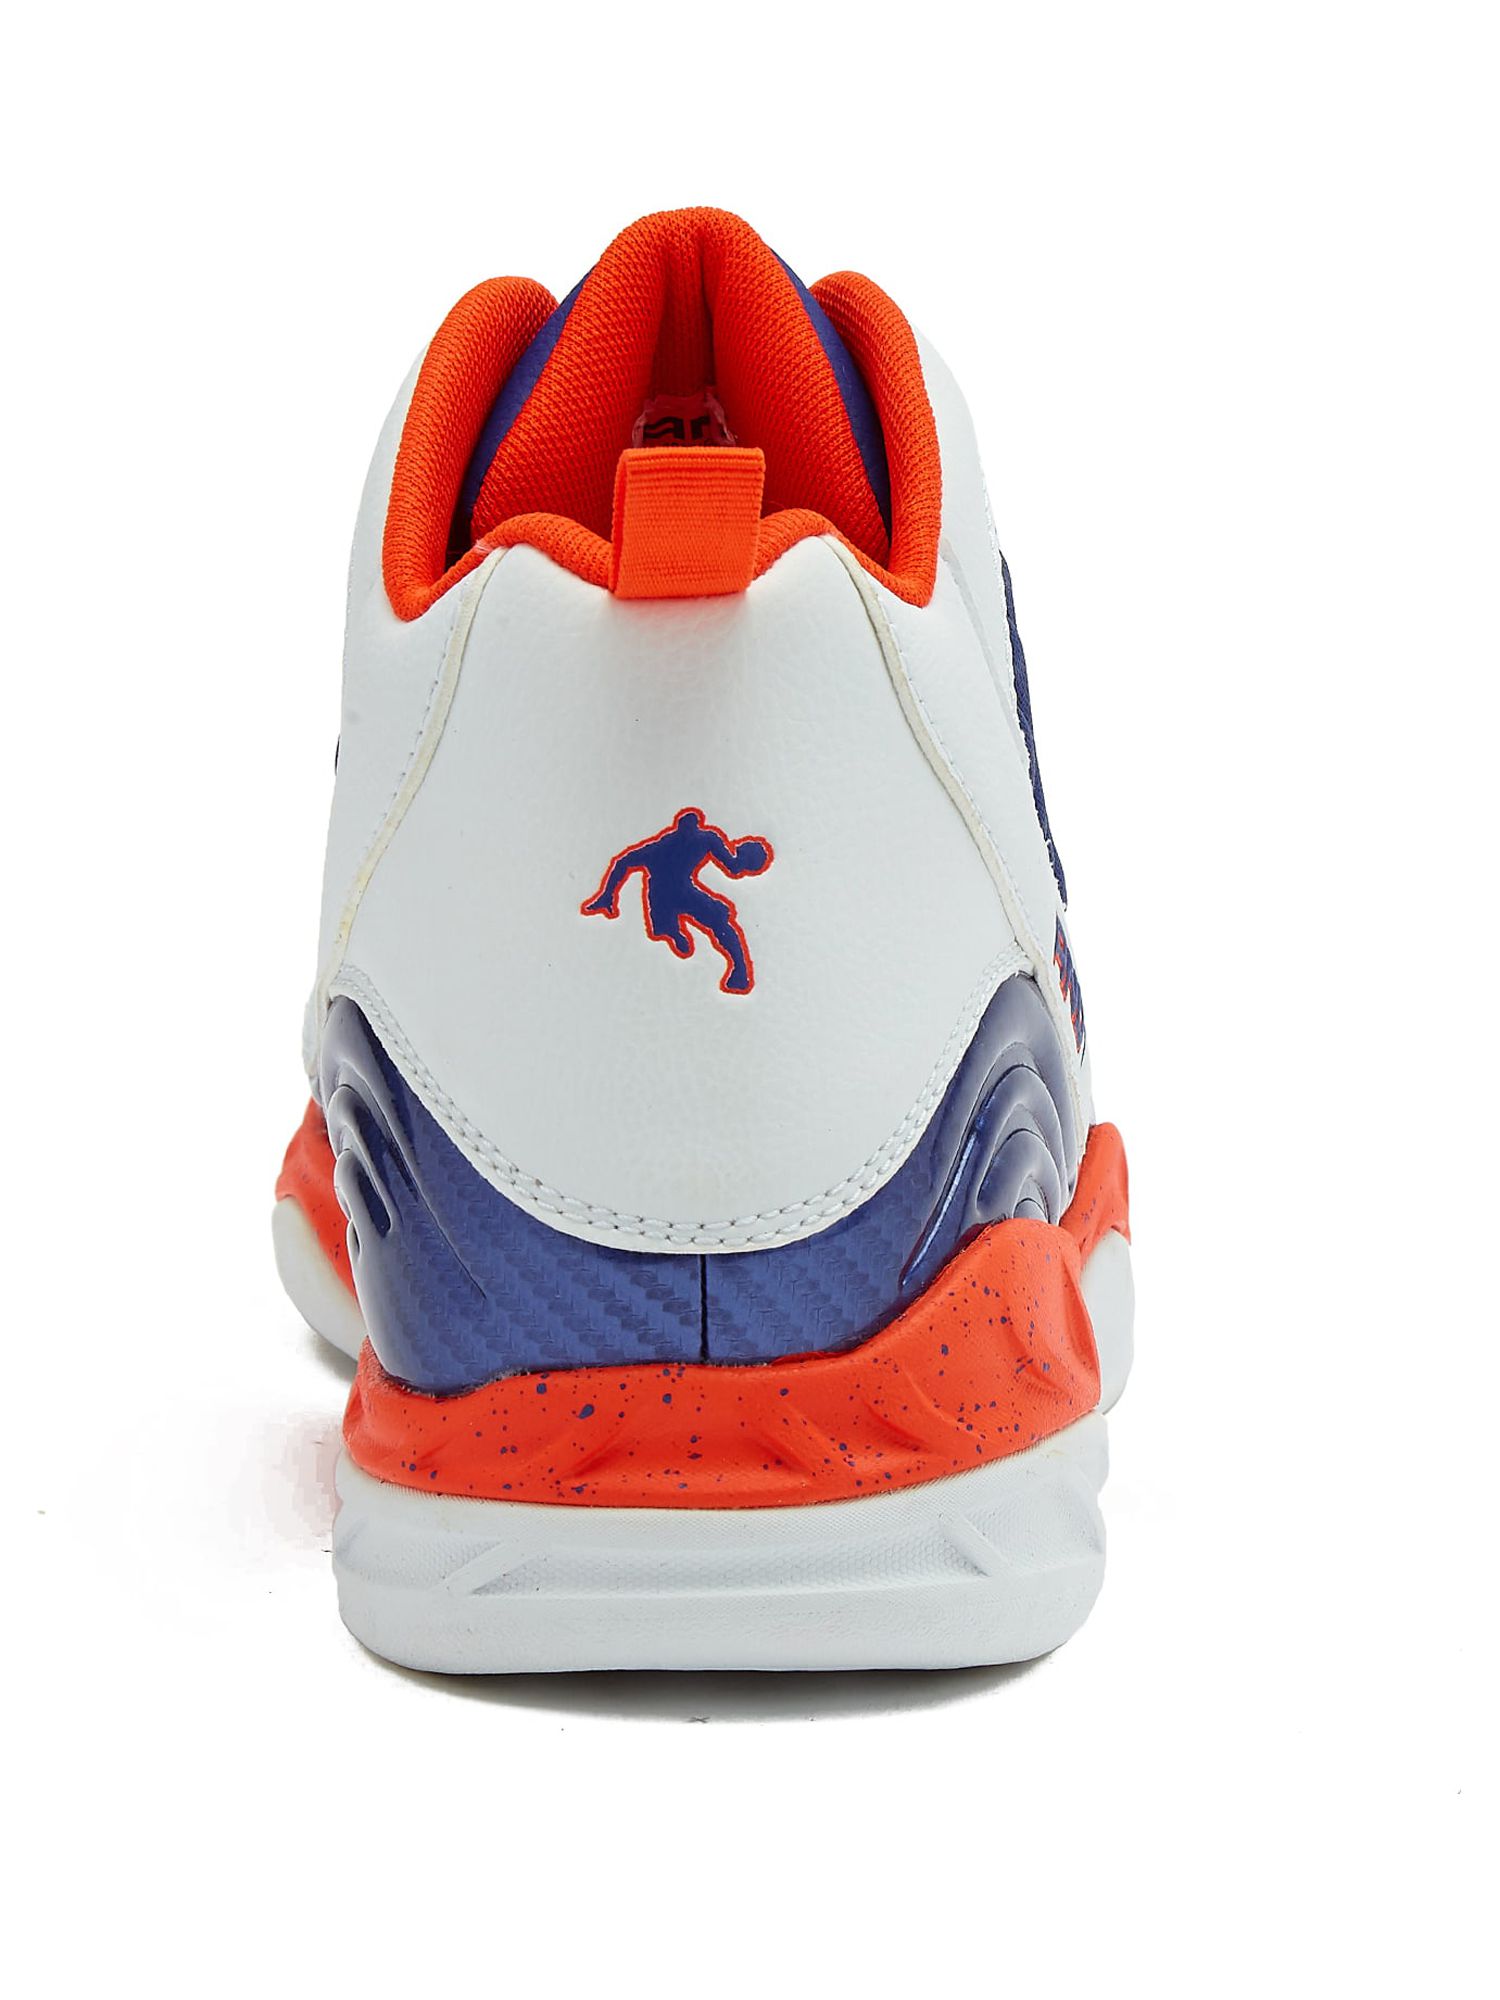 AND1 Men's Maverick Basketball High-Top Sneakers - image 4 of 5